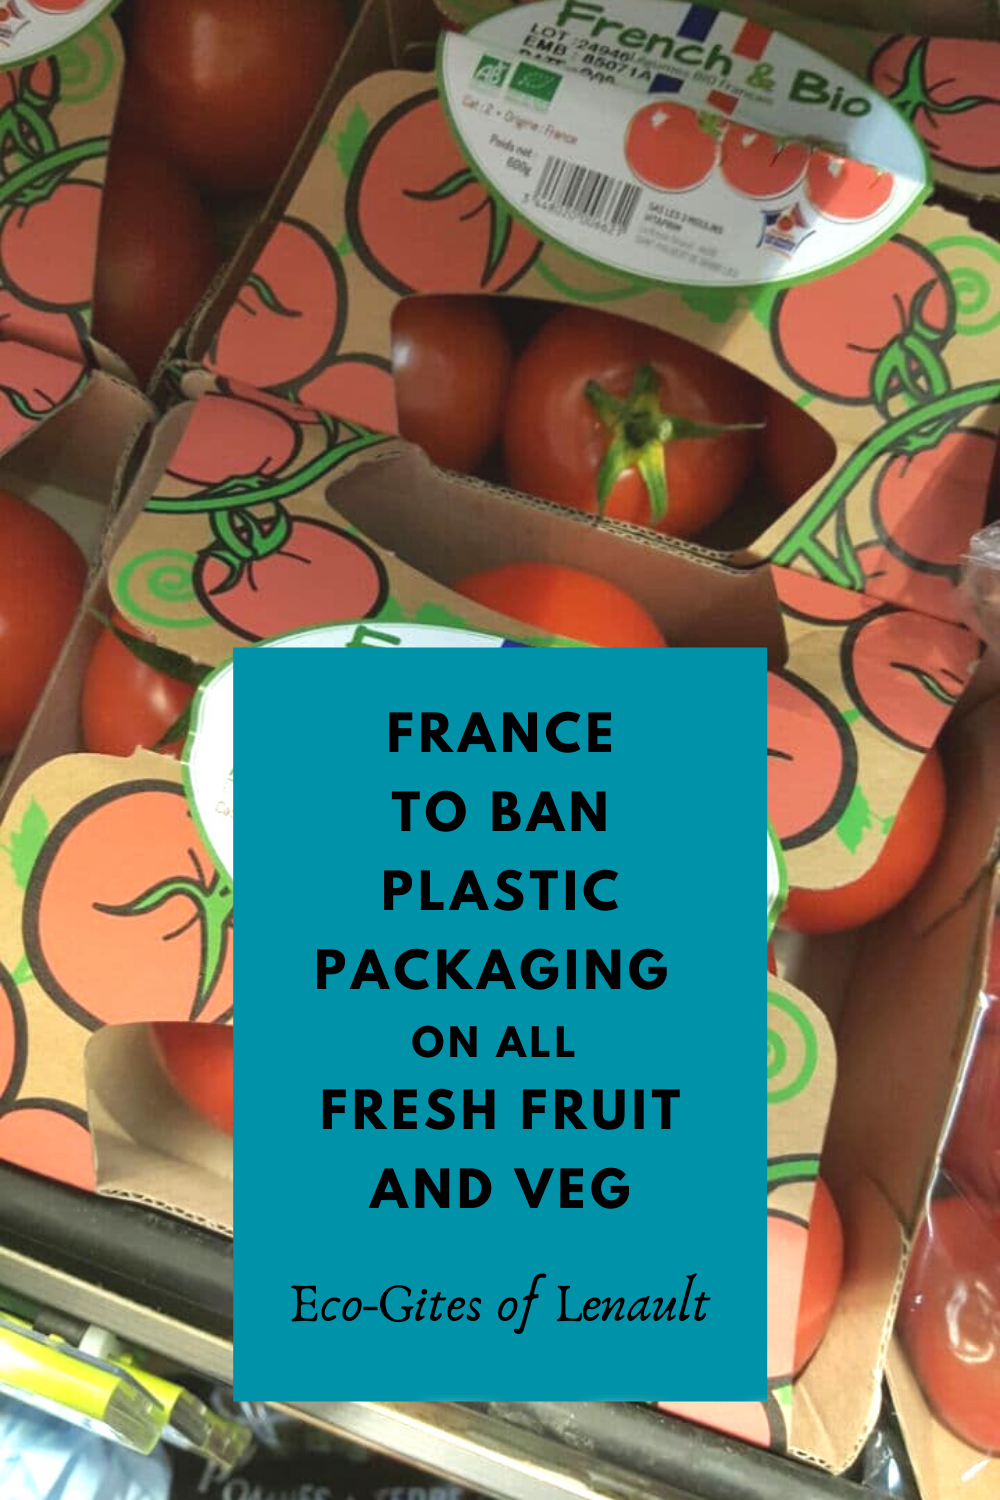 France to ban plastic packaging on fresh fruit and veg